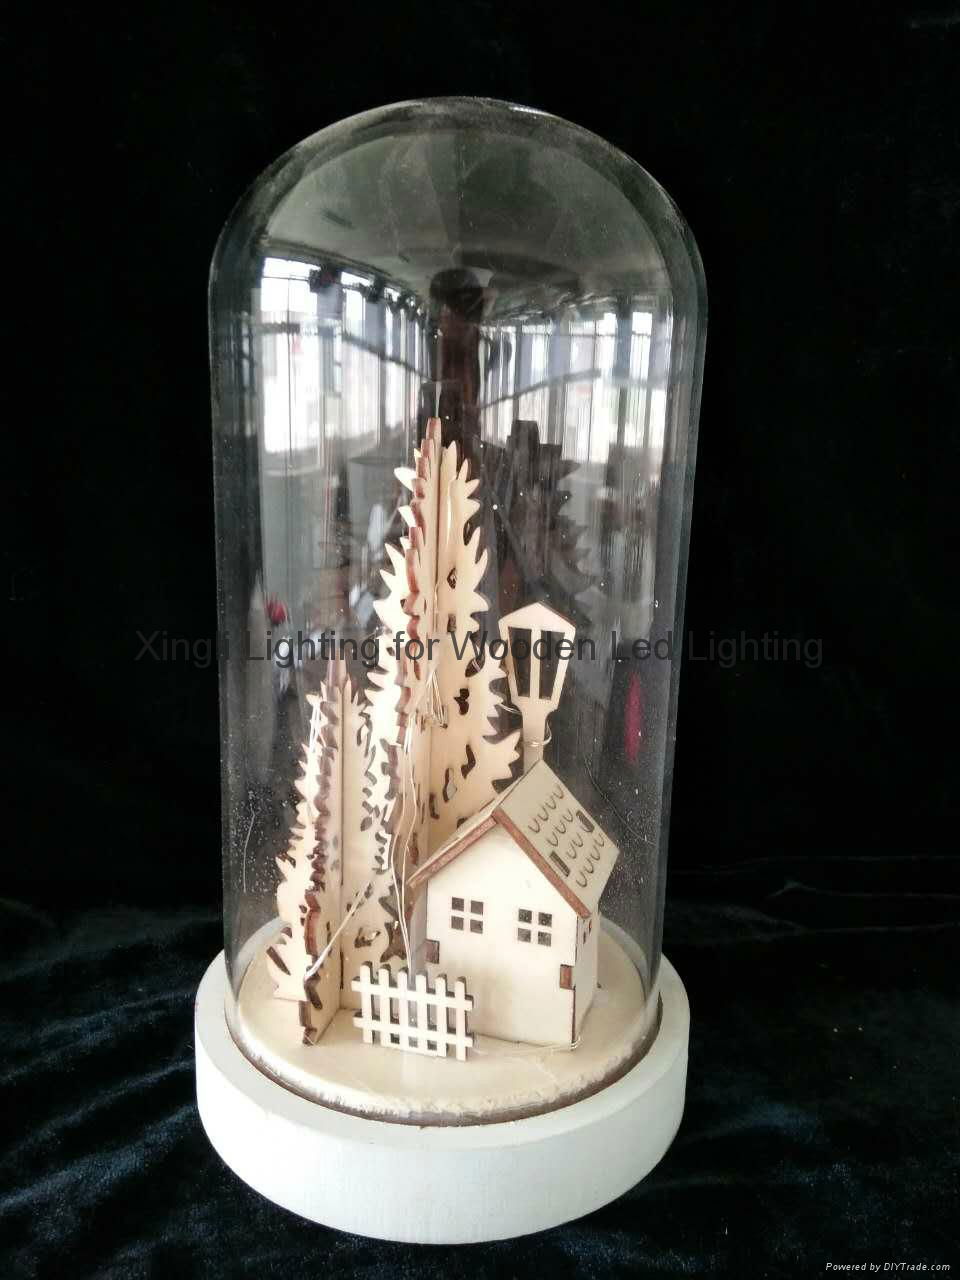 XL lighting factory MDF base glass dome light gifts glass dome lighting crafts